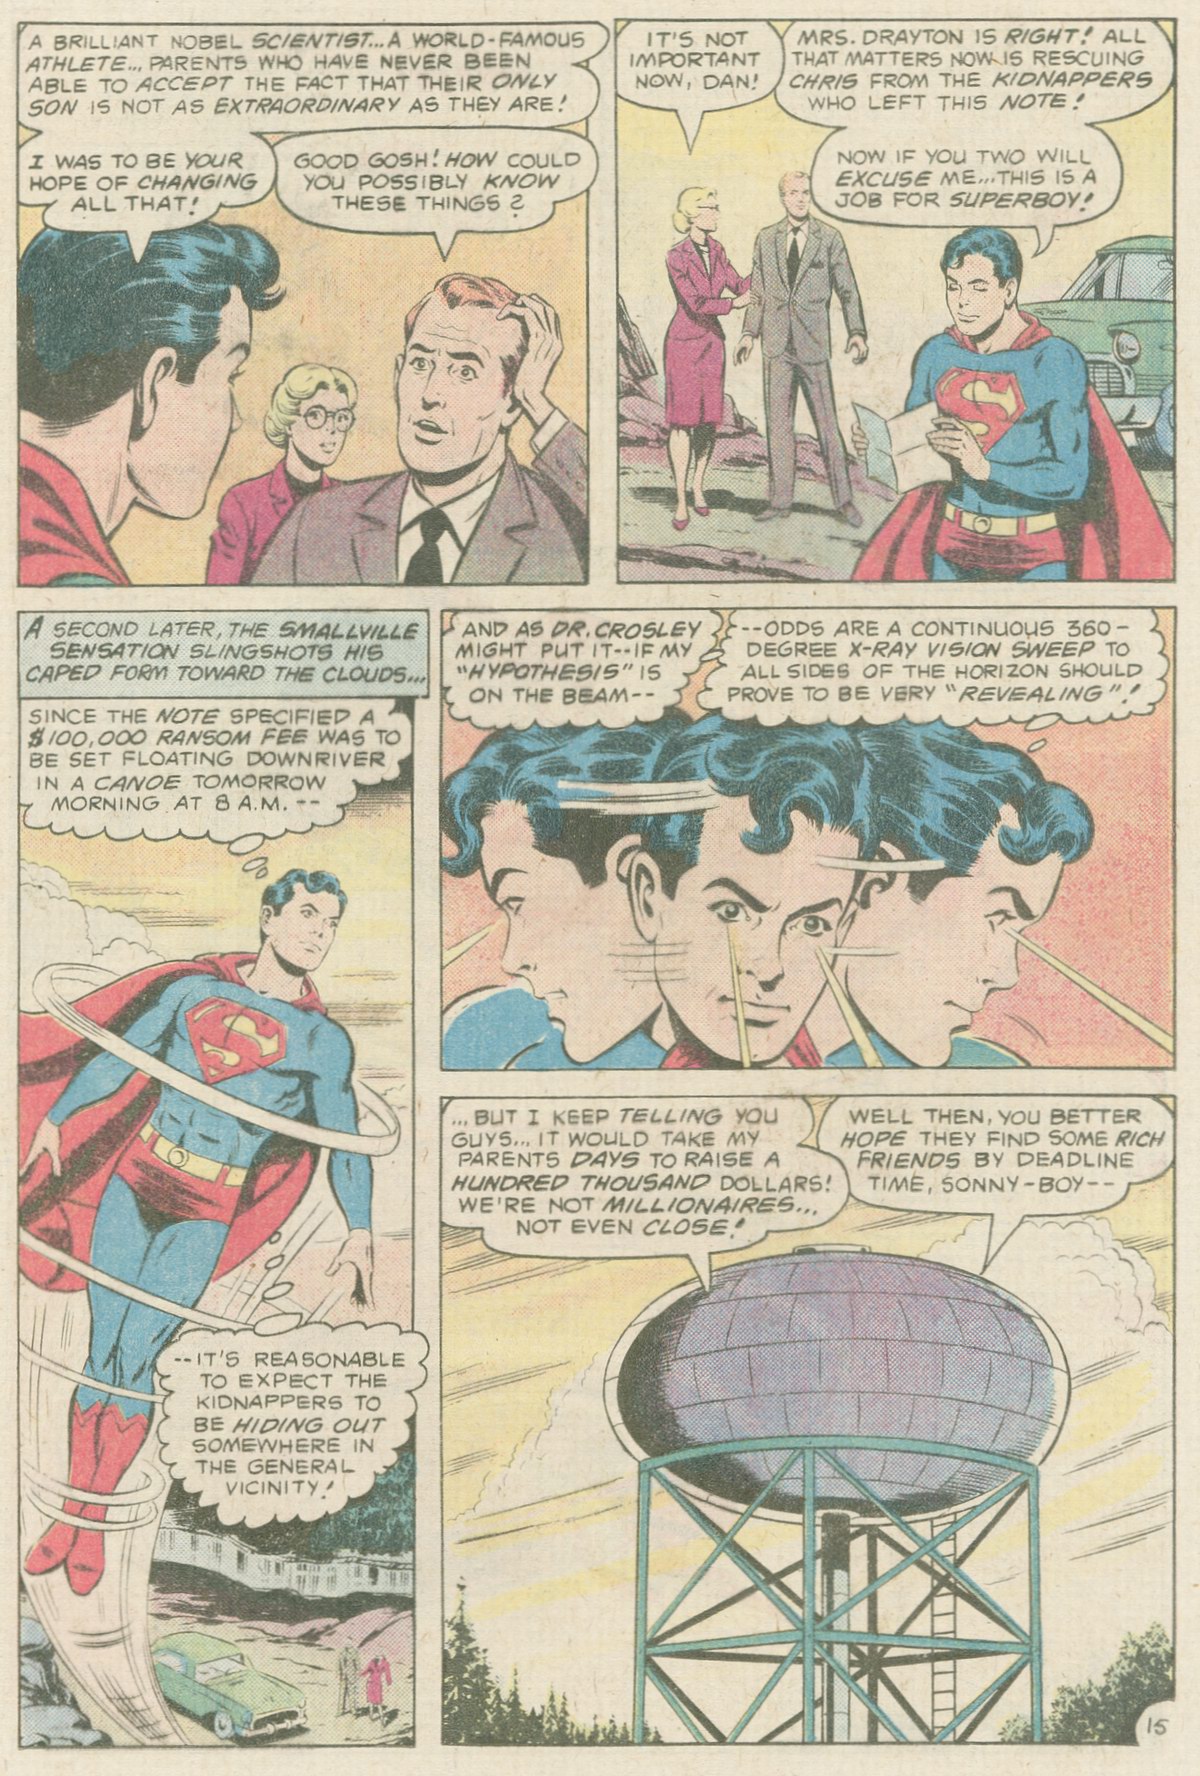 The New Adventures of Superboy 16 Page 15